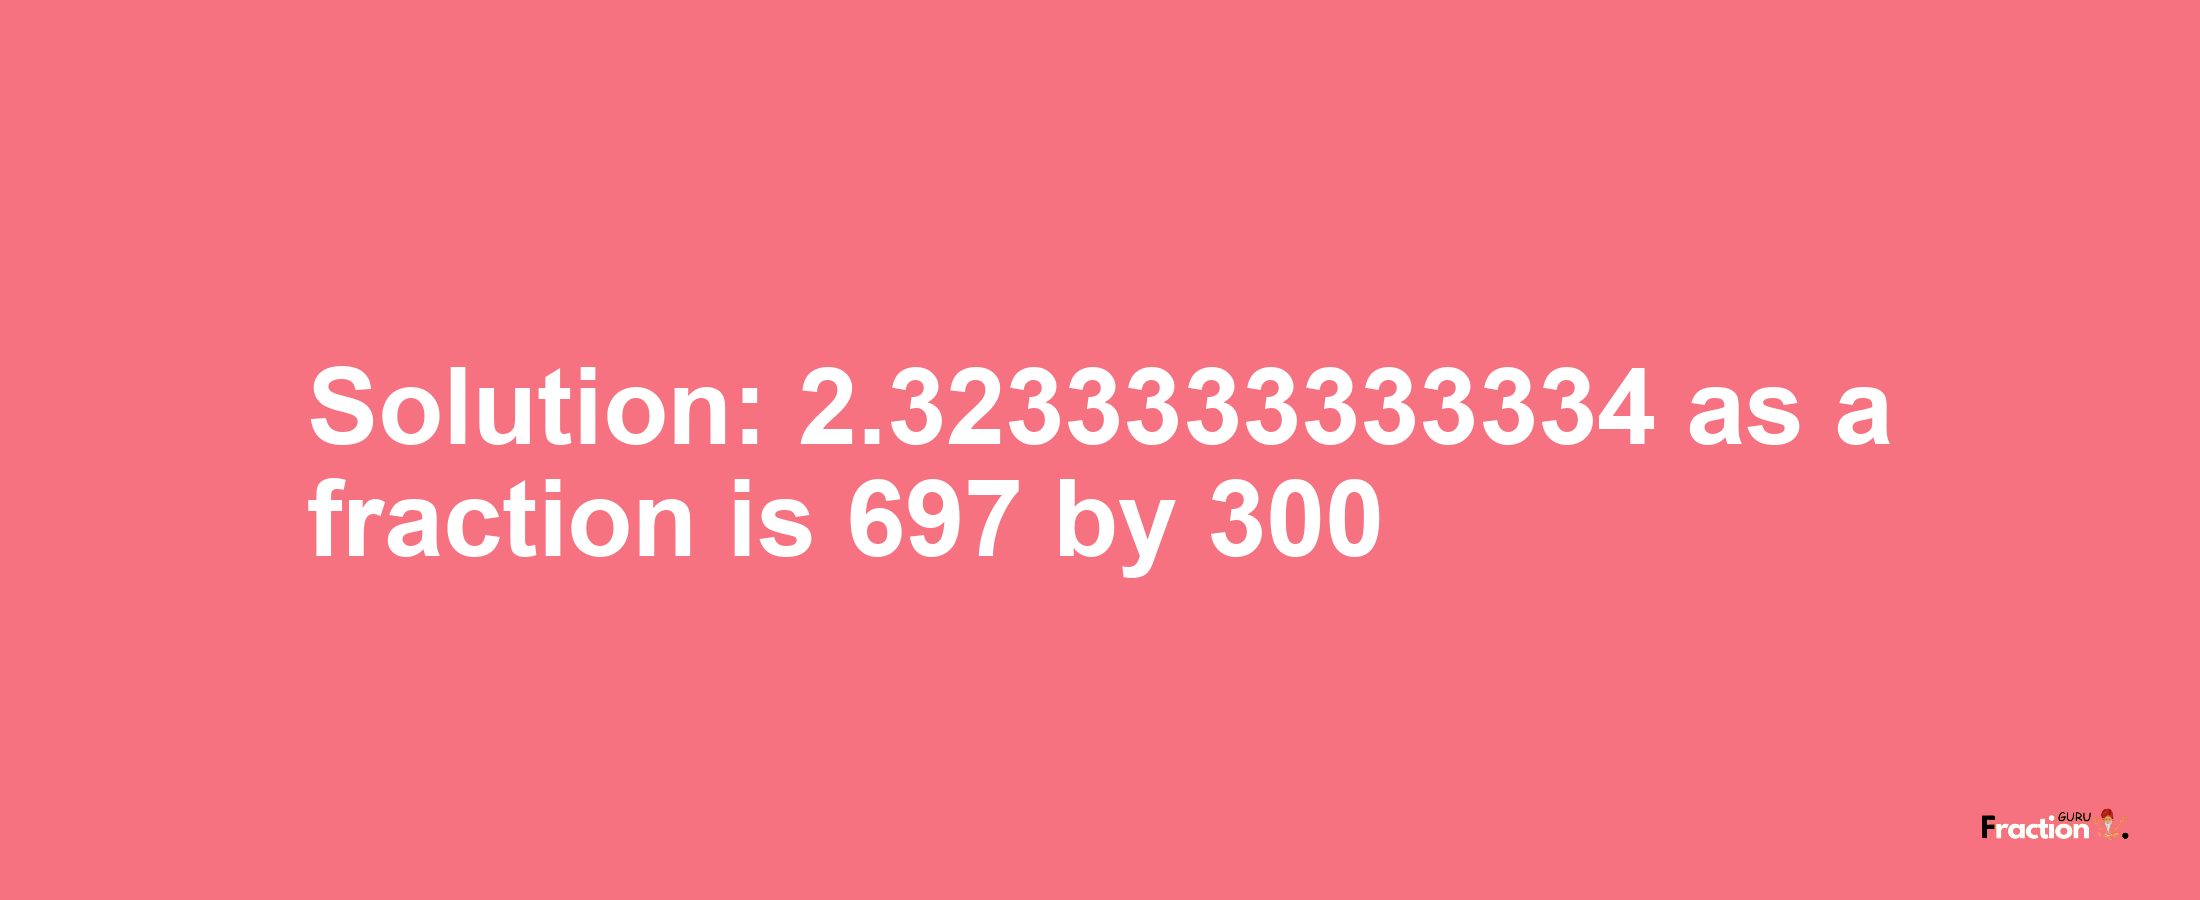 Solution:2.3233333333334 as a fraction is 697/300